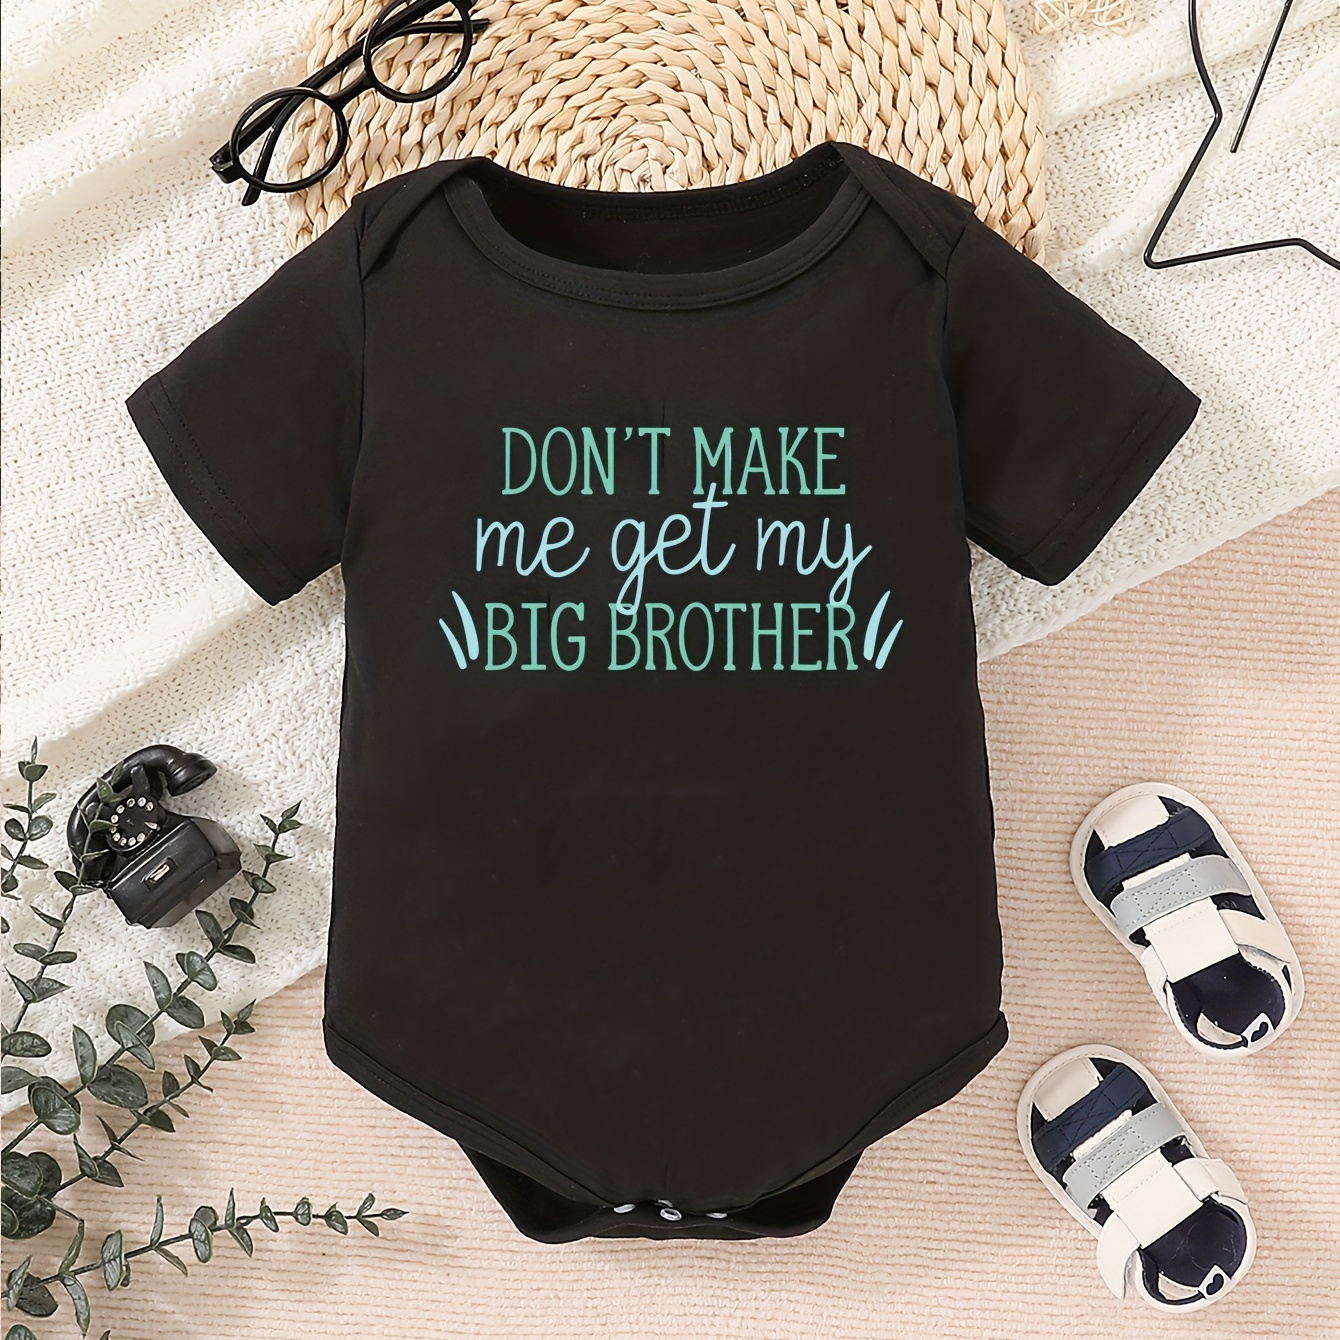 

Infant's "don't Make Me Get My Big Brother" Print Bodysuit, Casual Short Sleeve Onesie, Baby Boy's Clothing